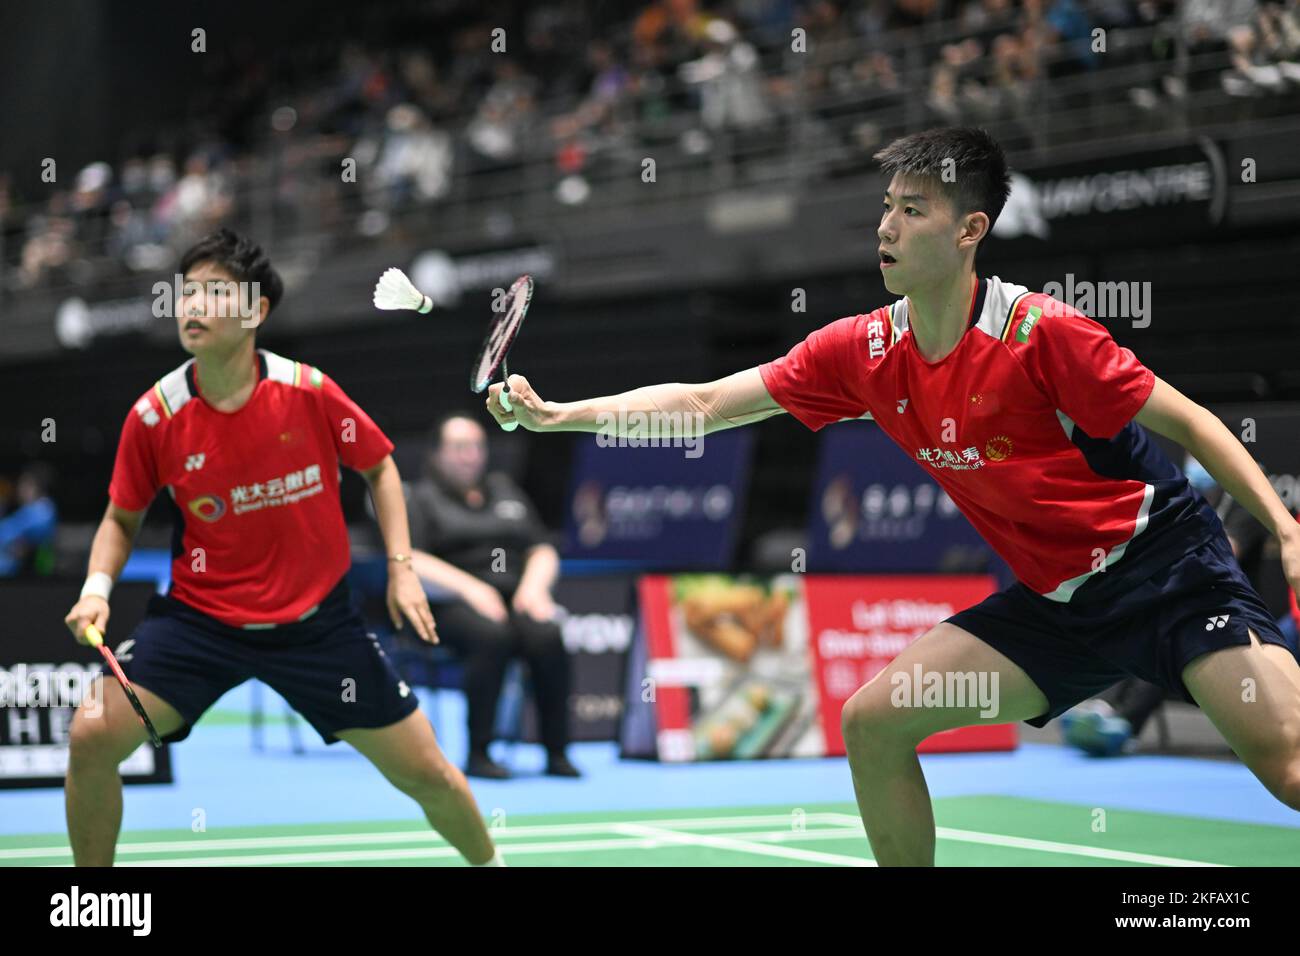 Sydney, Australia. 17th Nov, 2022. Huang Dong Ping (L) and Feng Yan Zhe (R) of China seen during the 2022 SATHIO GROUP Australian Badminton Open mixed double round of 16 match against Young Hyuk Kim and Lee Yu Lim of Korea. Feng and Huang won the match 12-21, 21-14, 21-15. (Photo by Luis Veniegra/SOPA Images/Sipa USA) Credit: Sipa USA/Alamy Live News Stock Photo